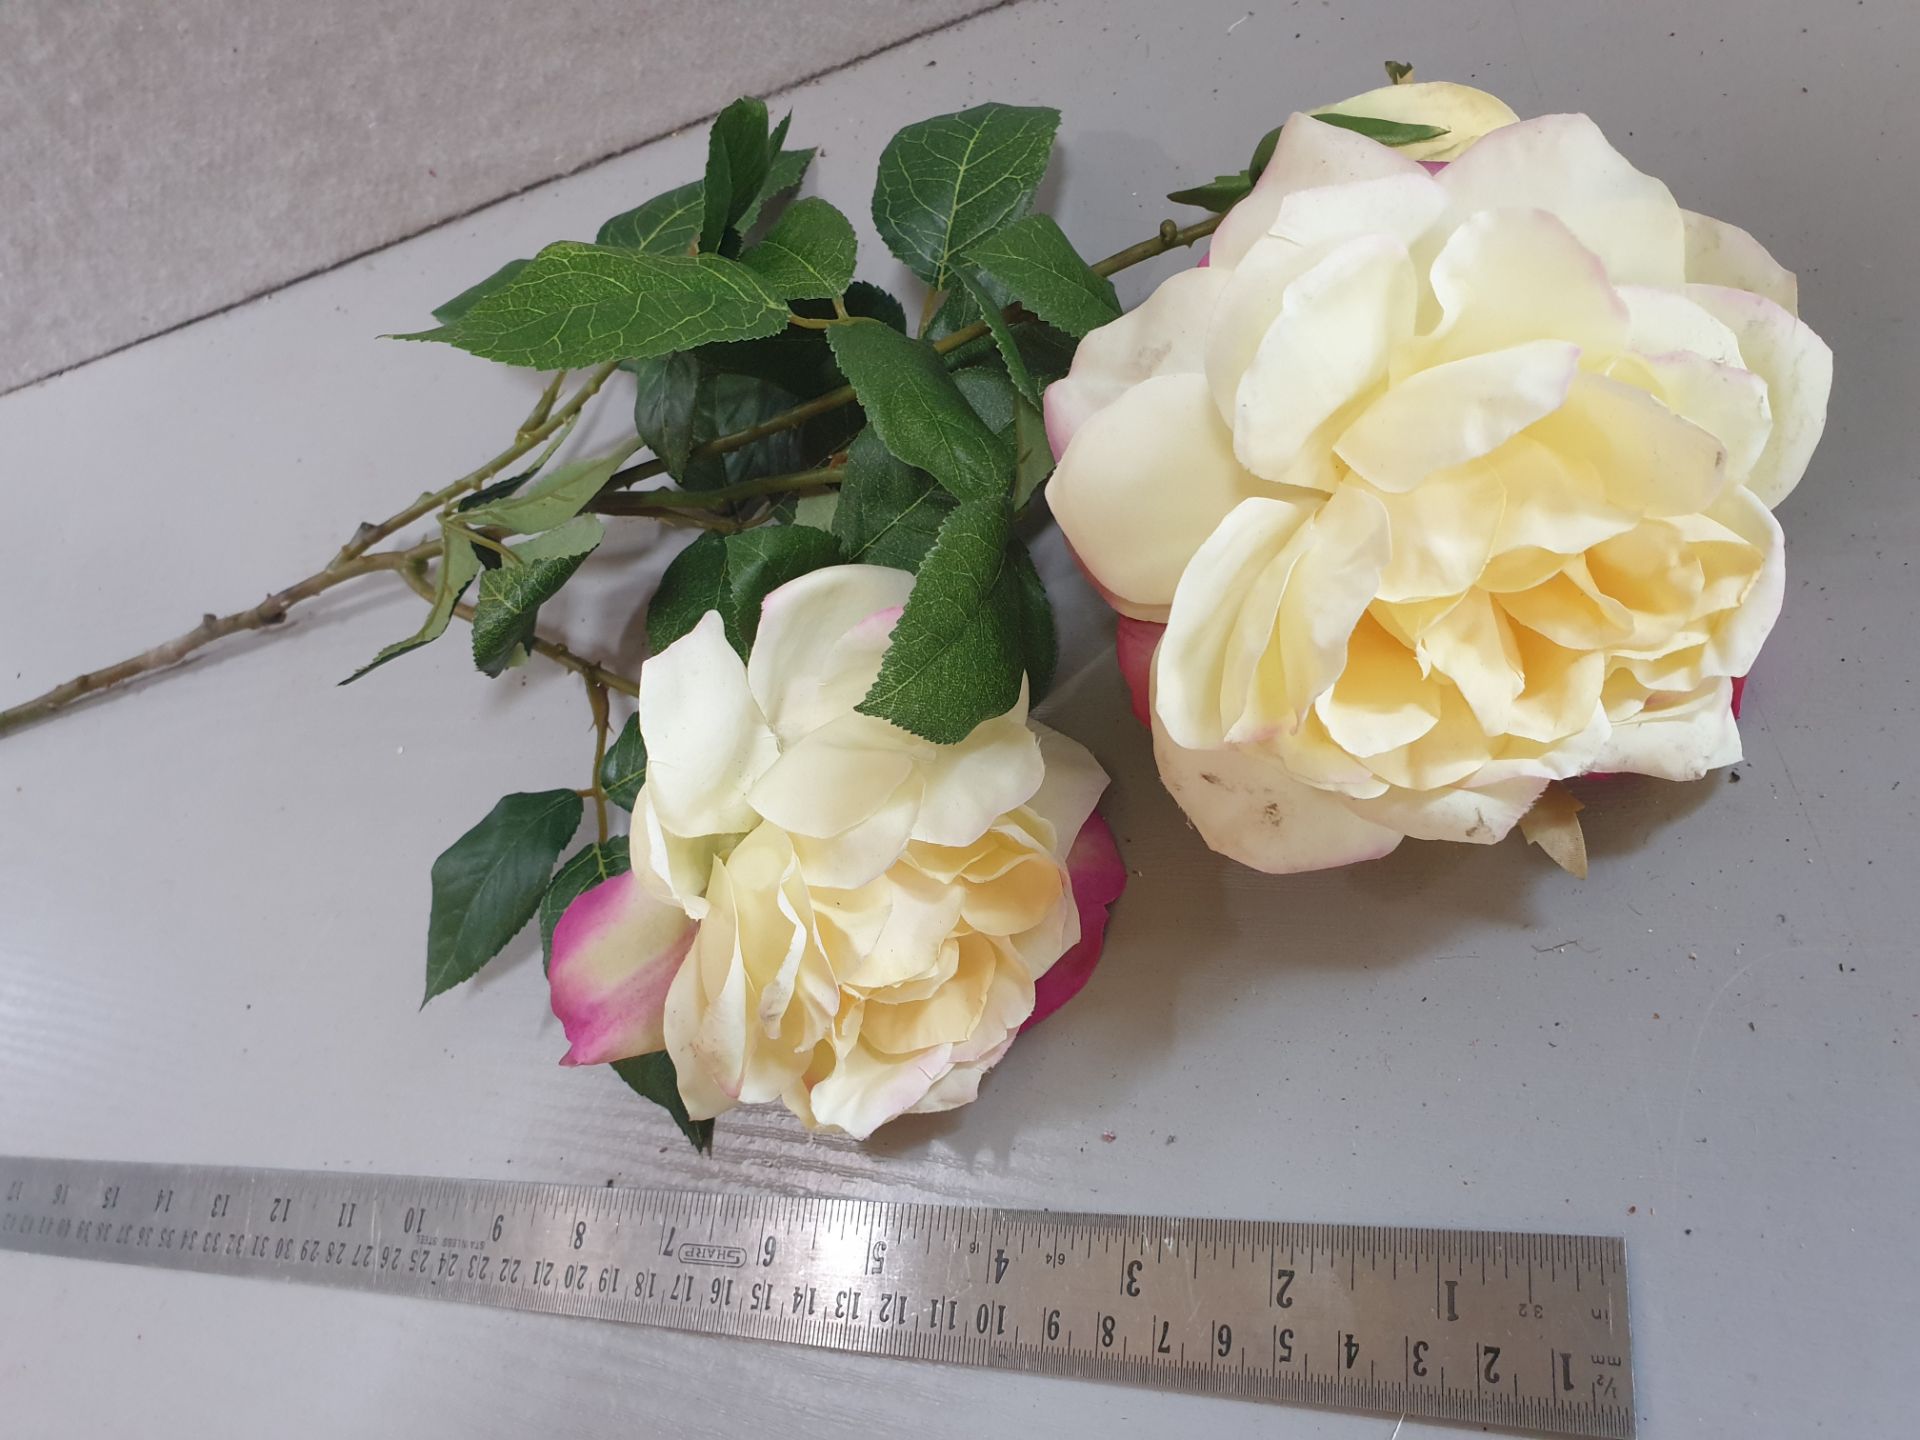 27 x Artificial Yellow Rose stem - 2 flowers, 1 bud